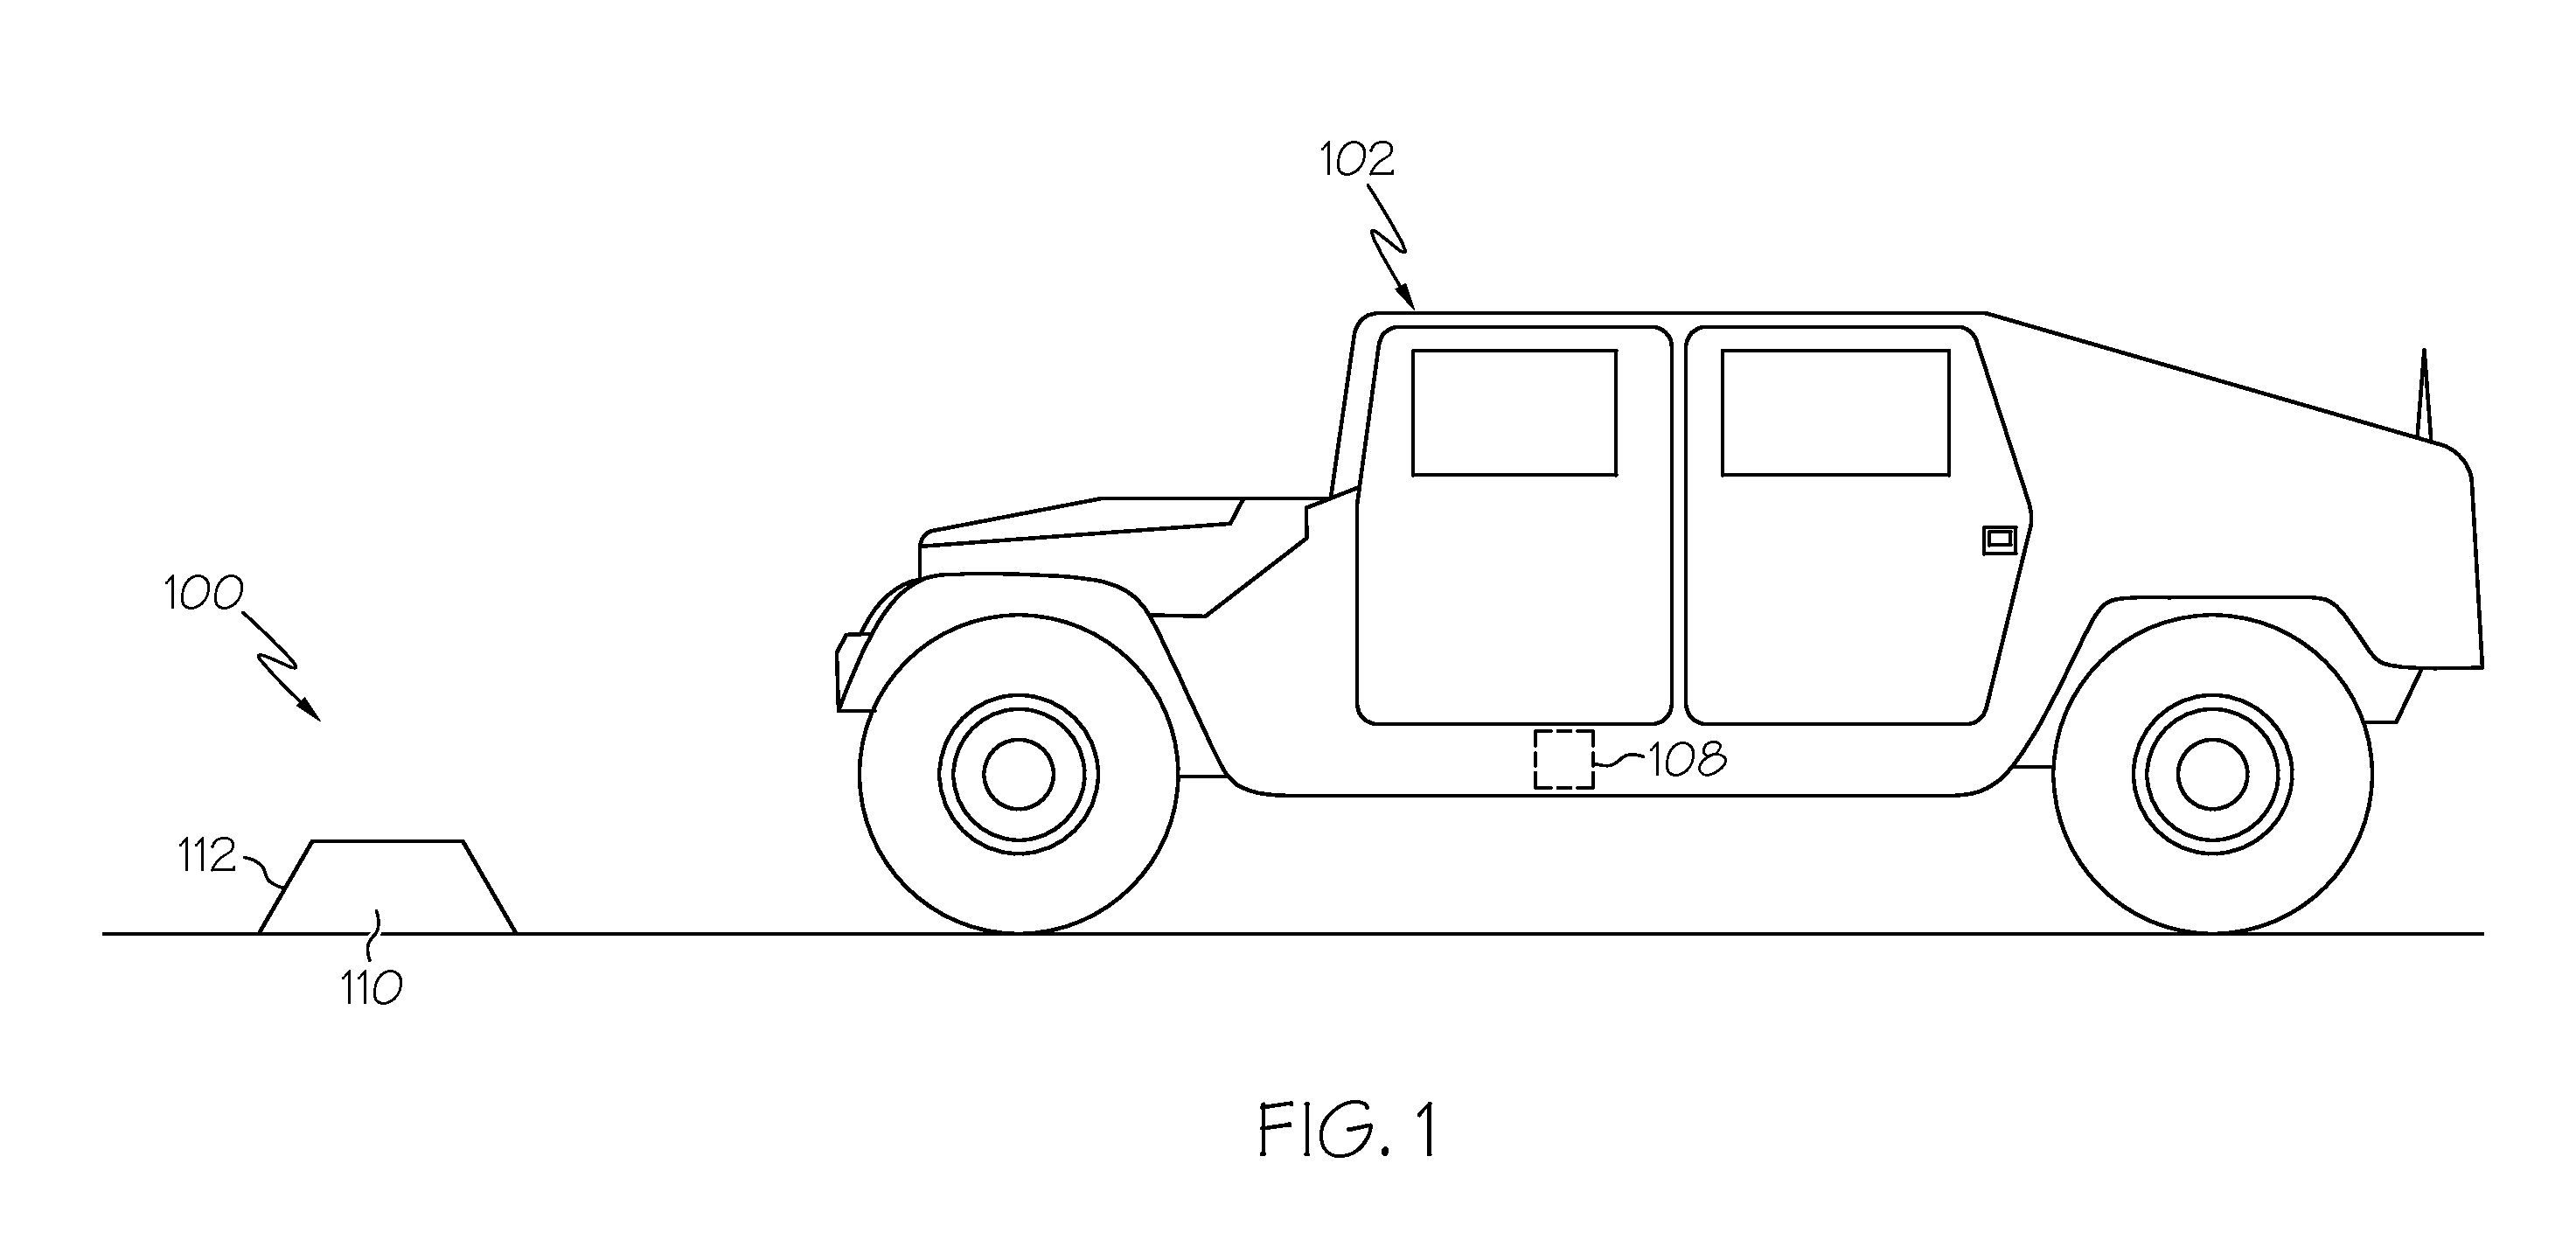 Health monitoring systems and methods with vehicle identification